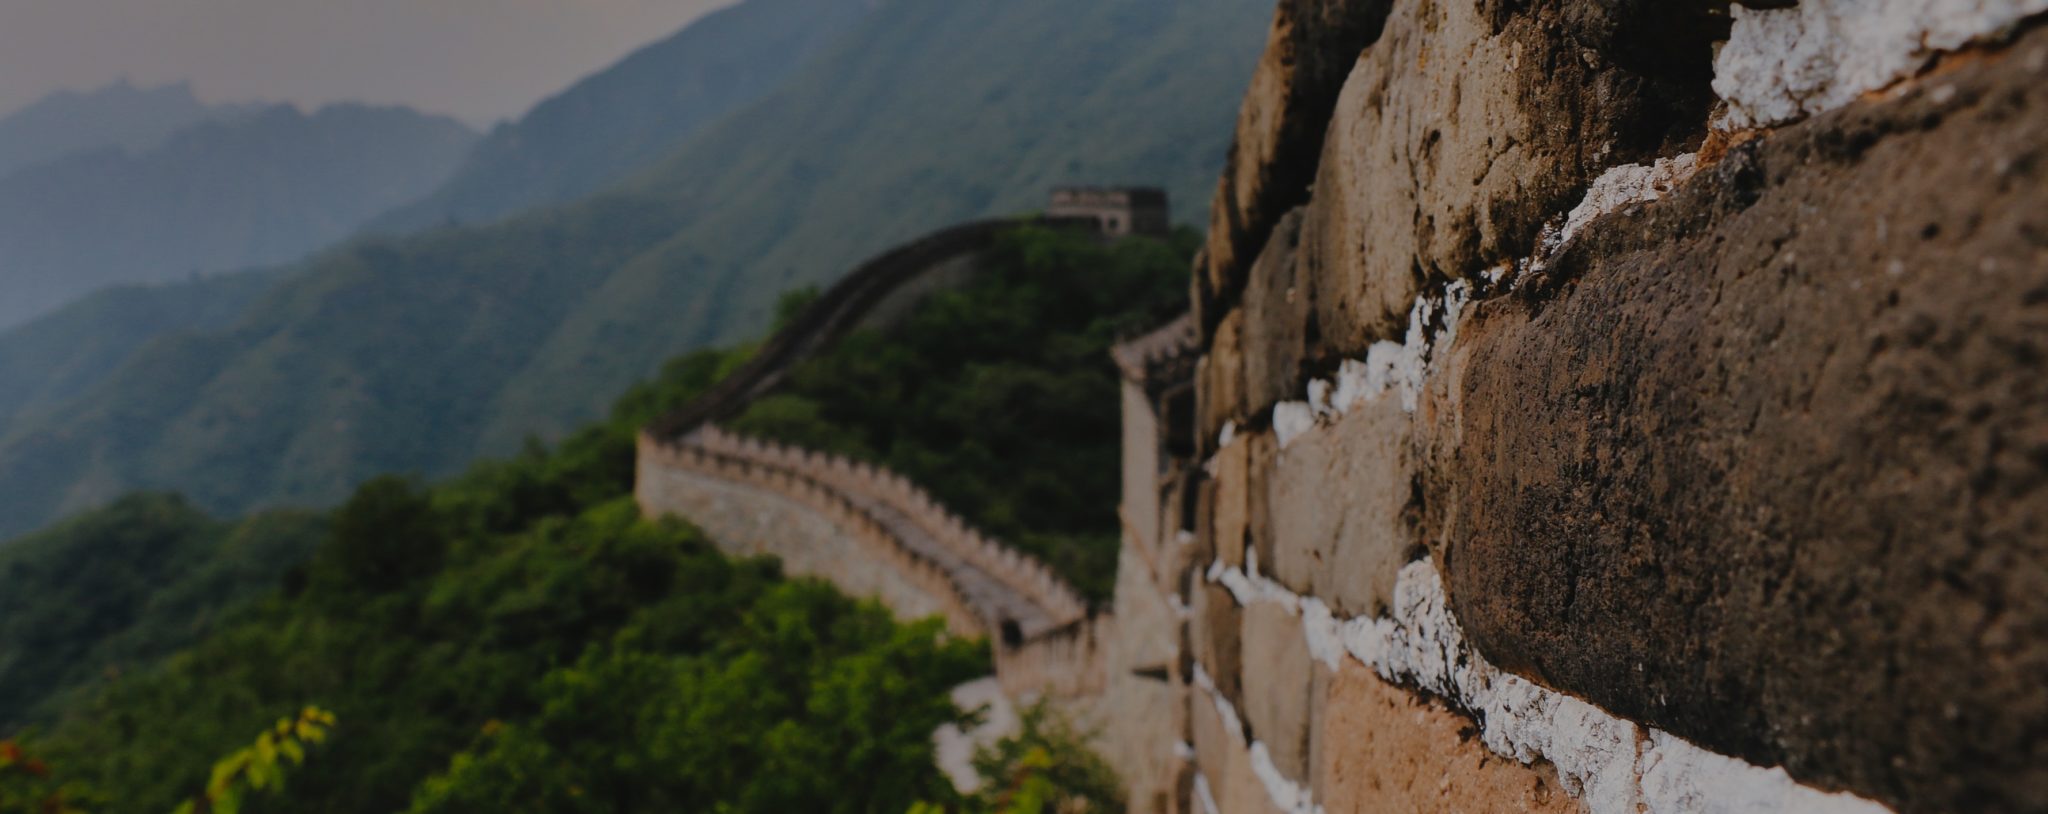 Bridging the old and the new for KYC in China